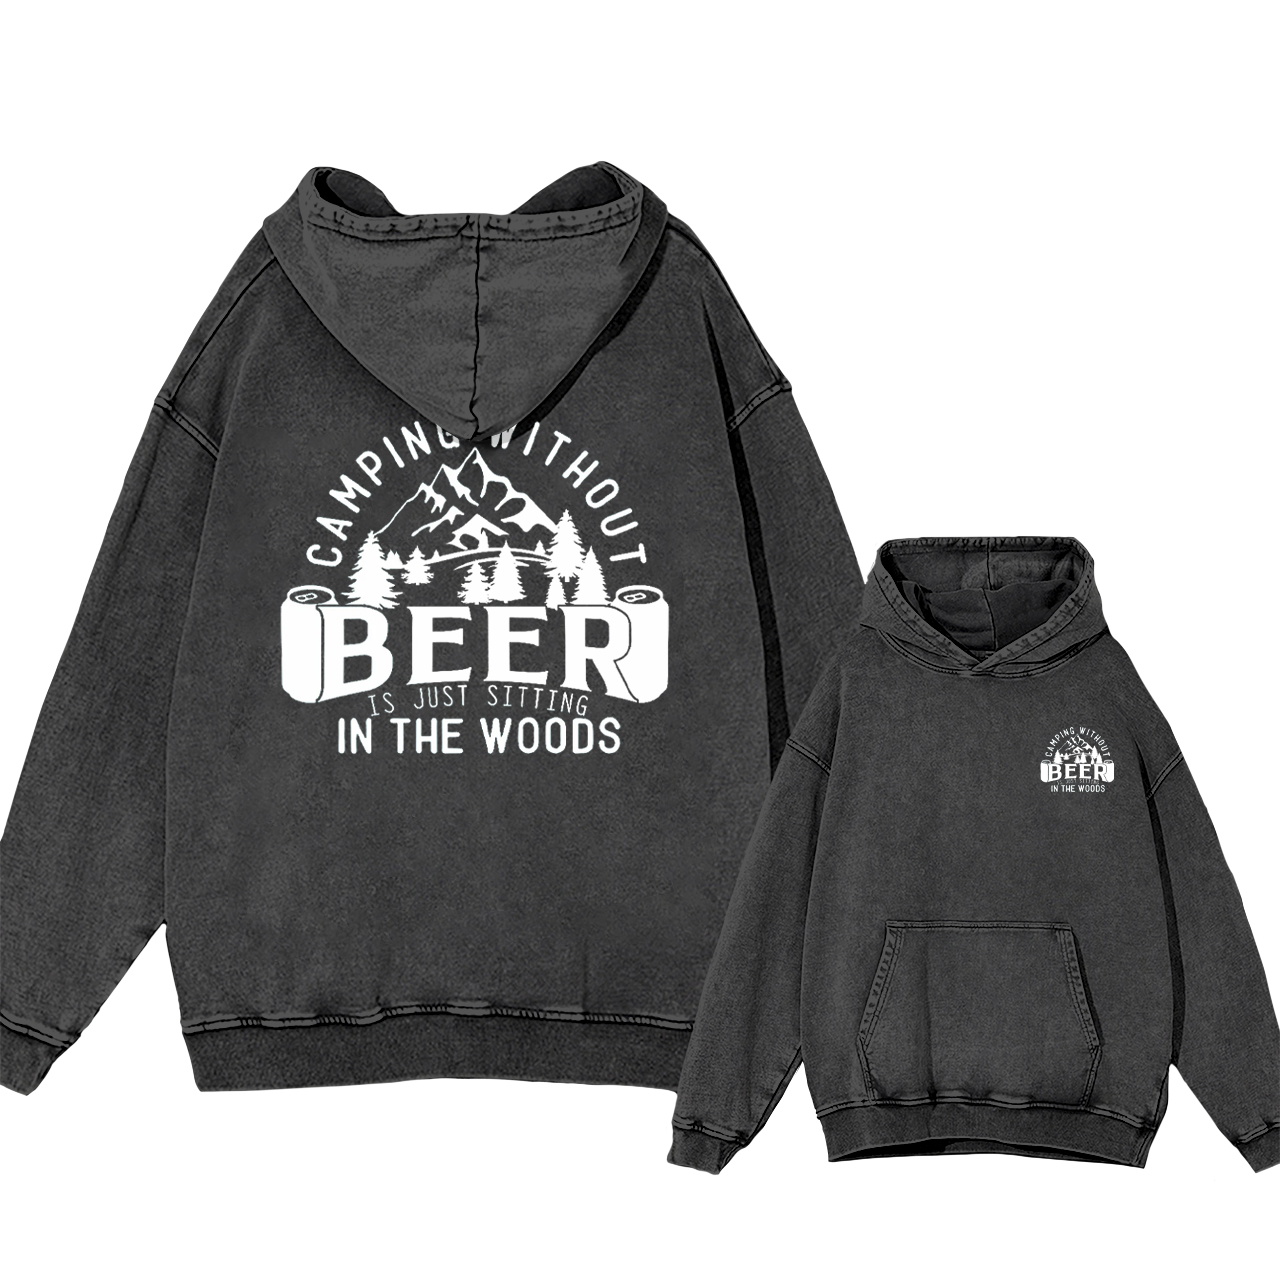 Camping Without Beer Is Just Sitting In The Woods Garment-Dye Hoodies